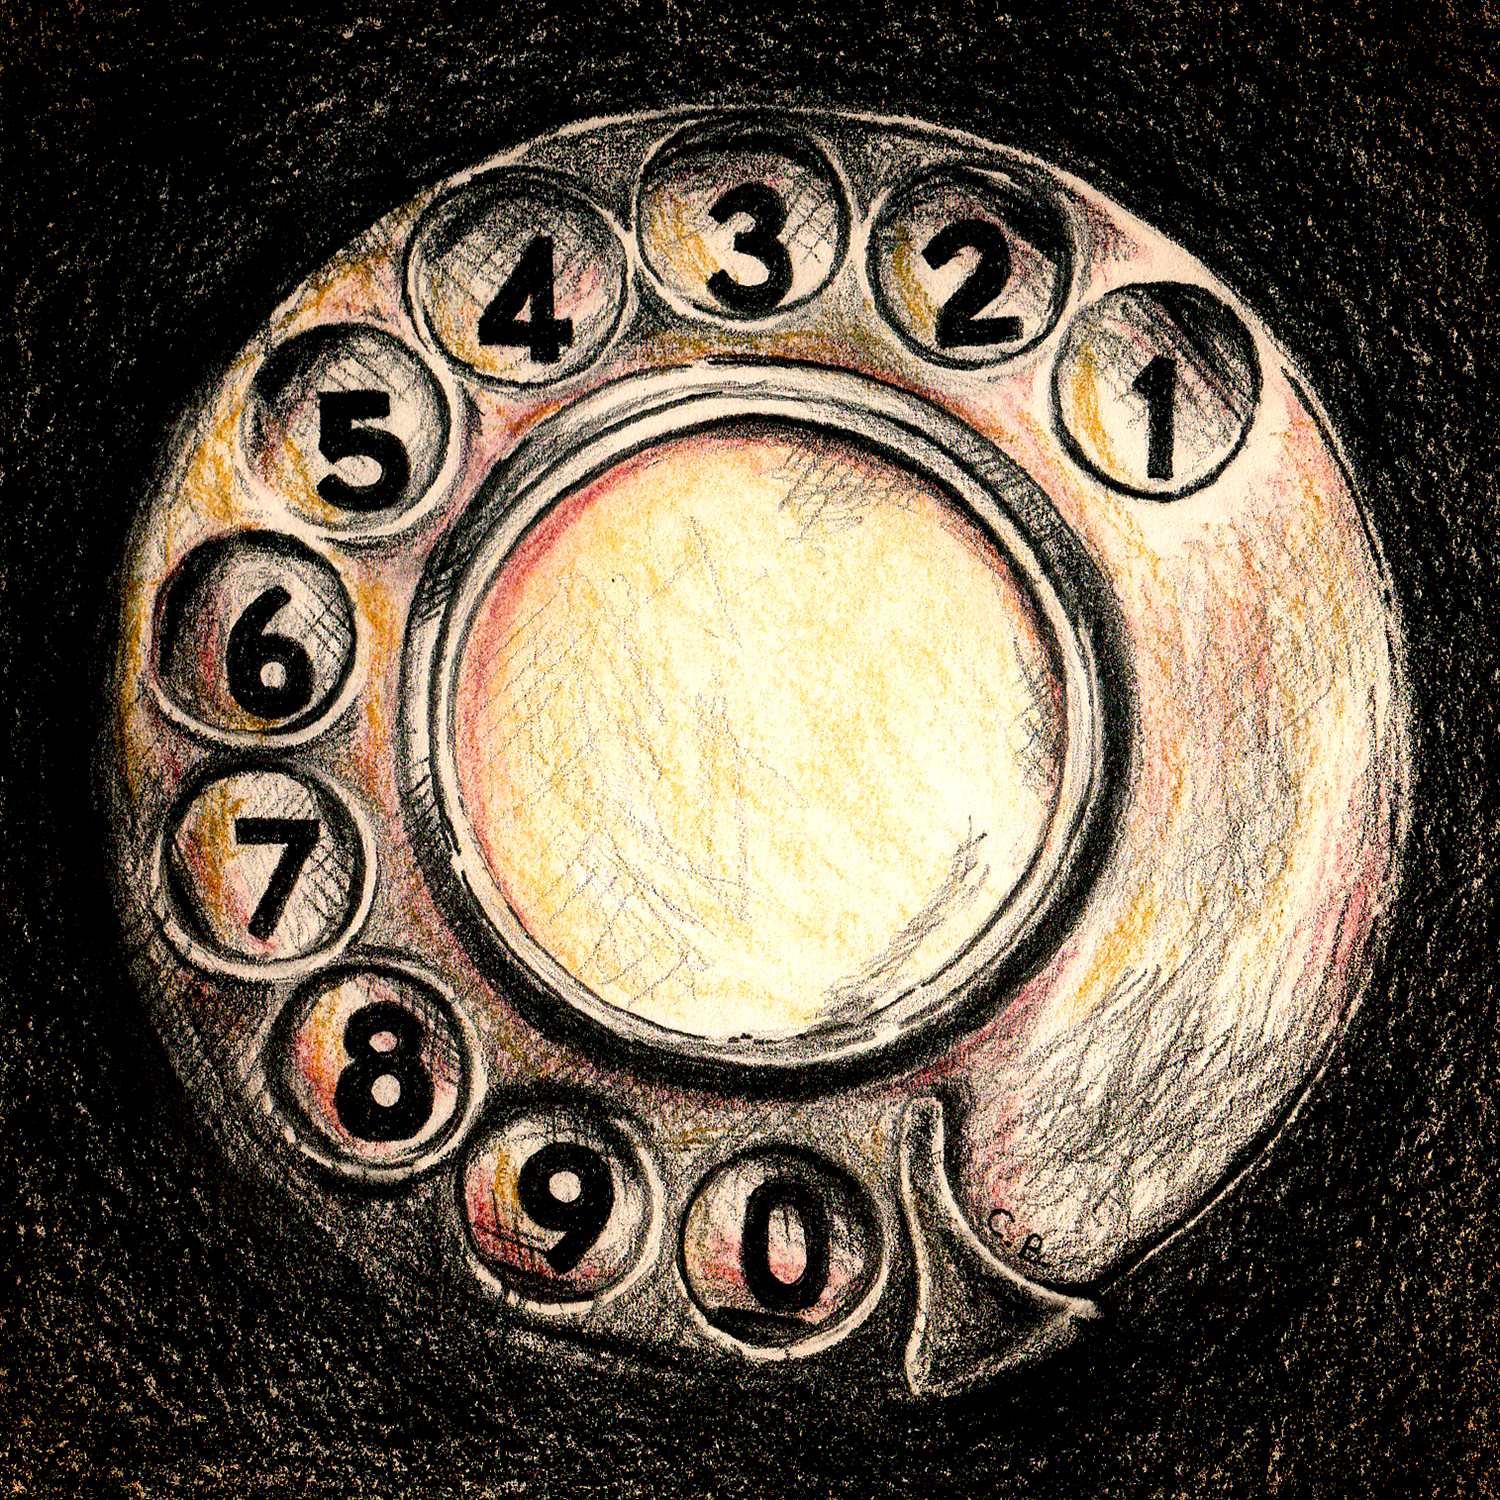 pastel and charcoal drawing of rotary dial from old phone